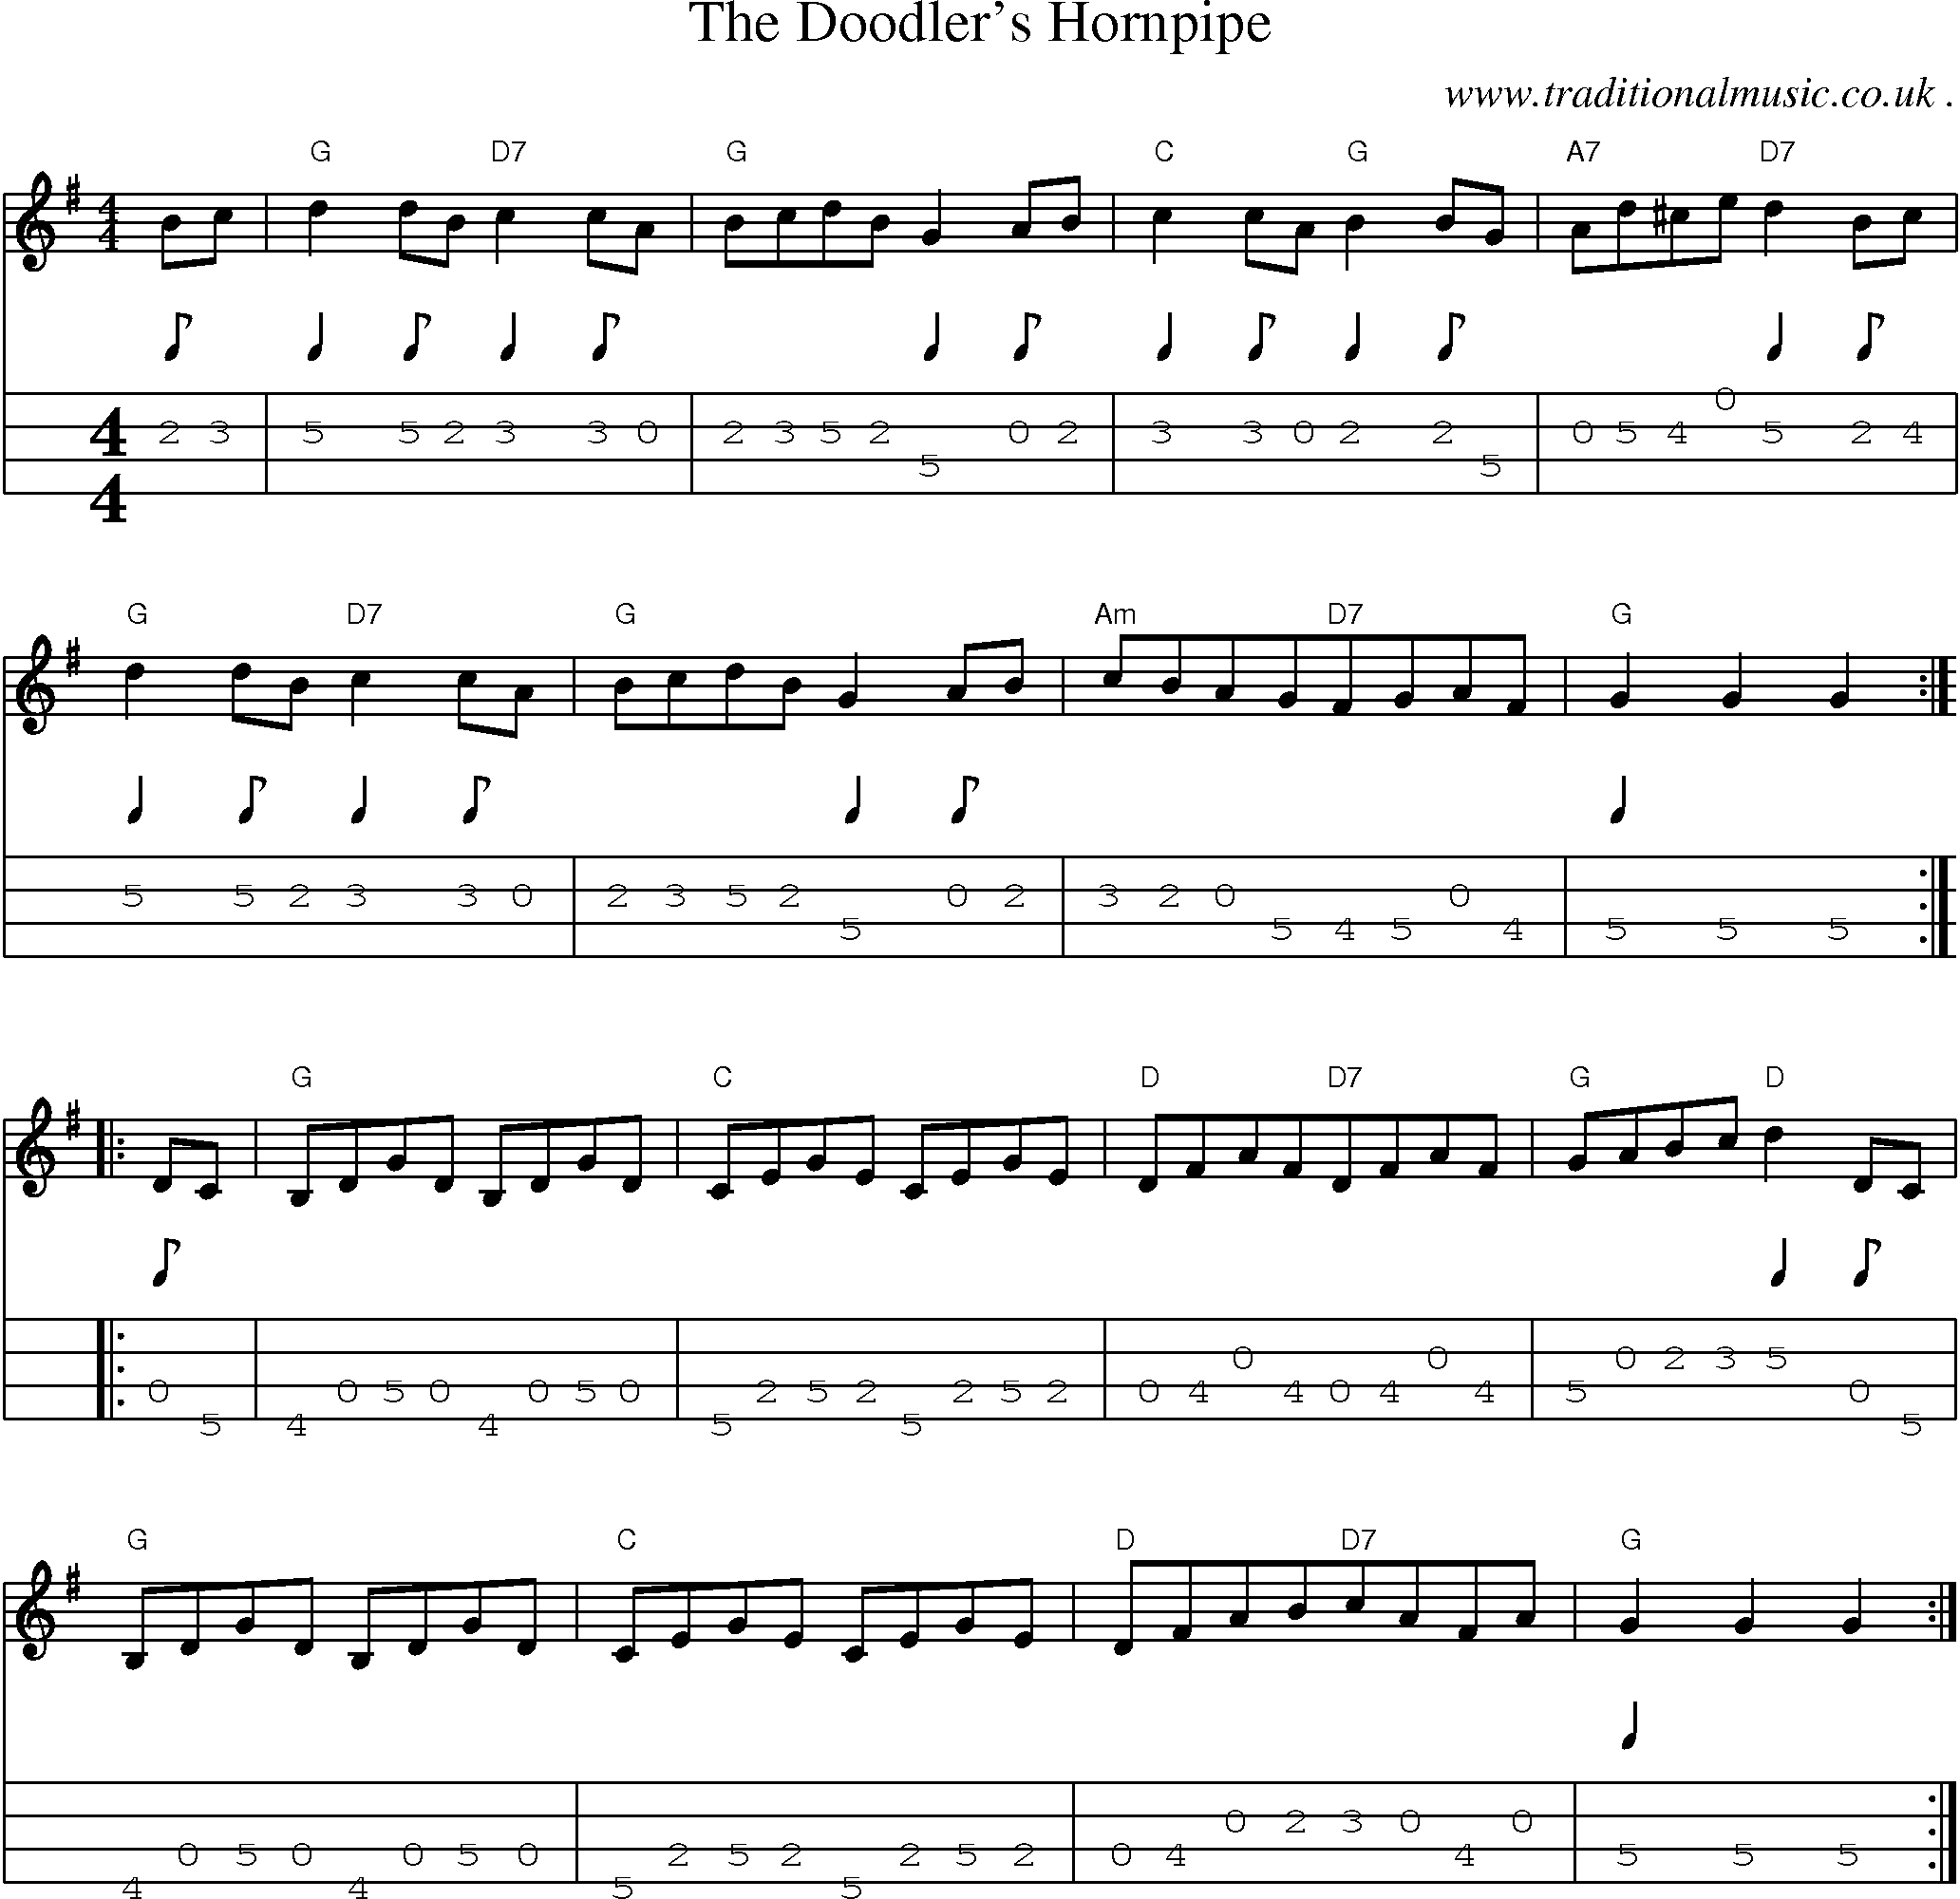 Sheet-Music and Mandolin Tabs for The Doodlers Hornpipe